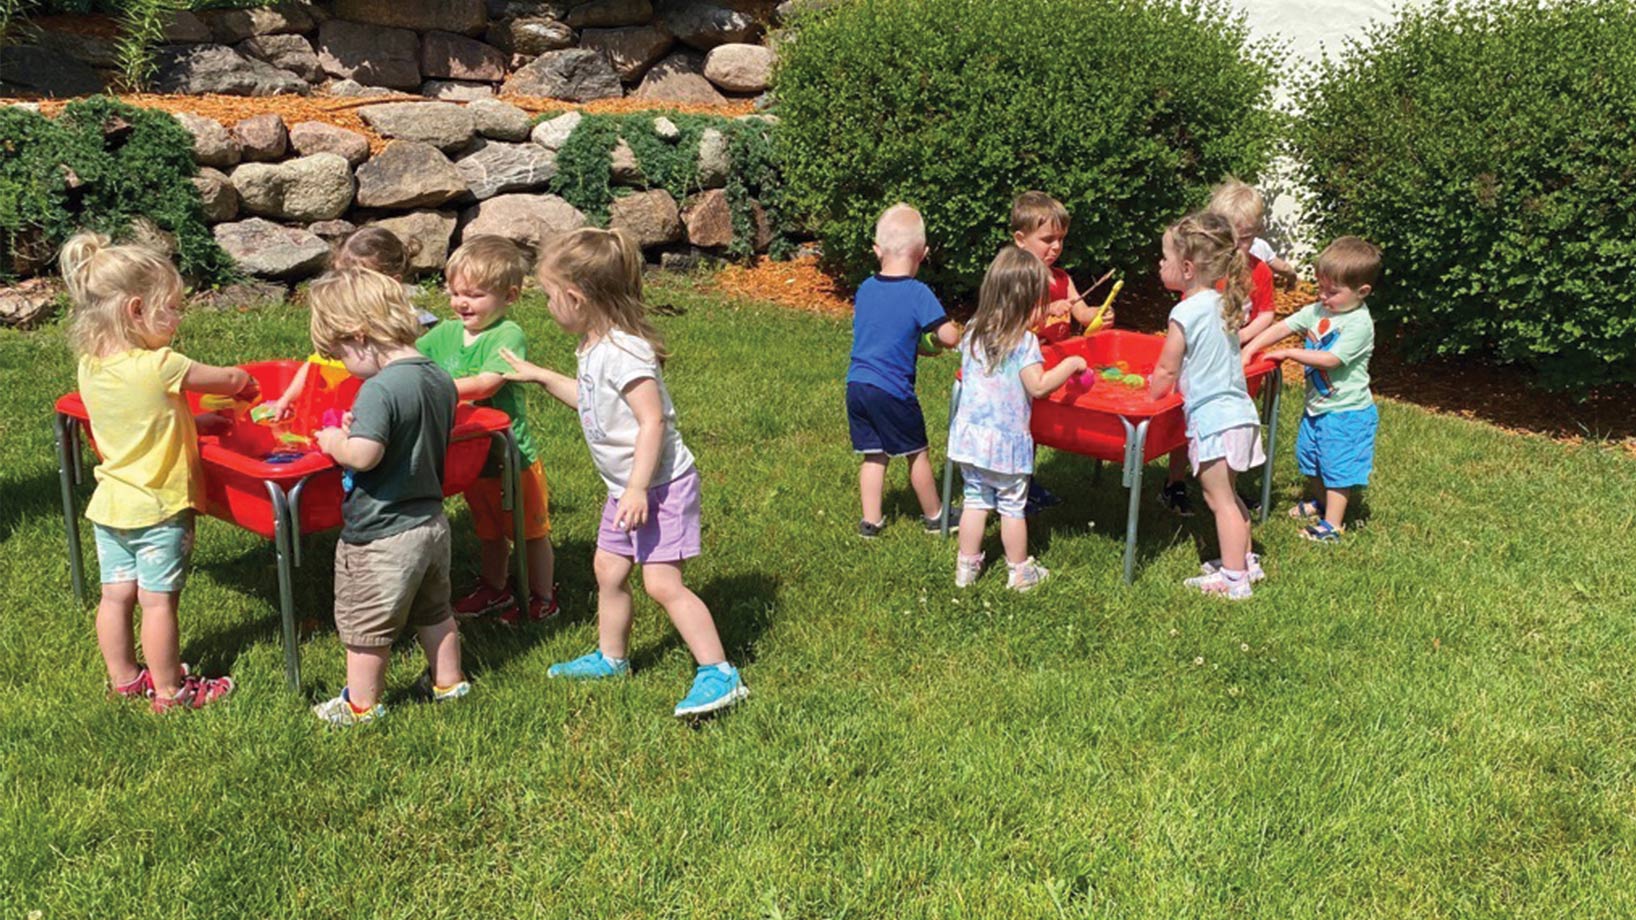 Class of kids playing outside in water sensory bins on grass